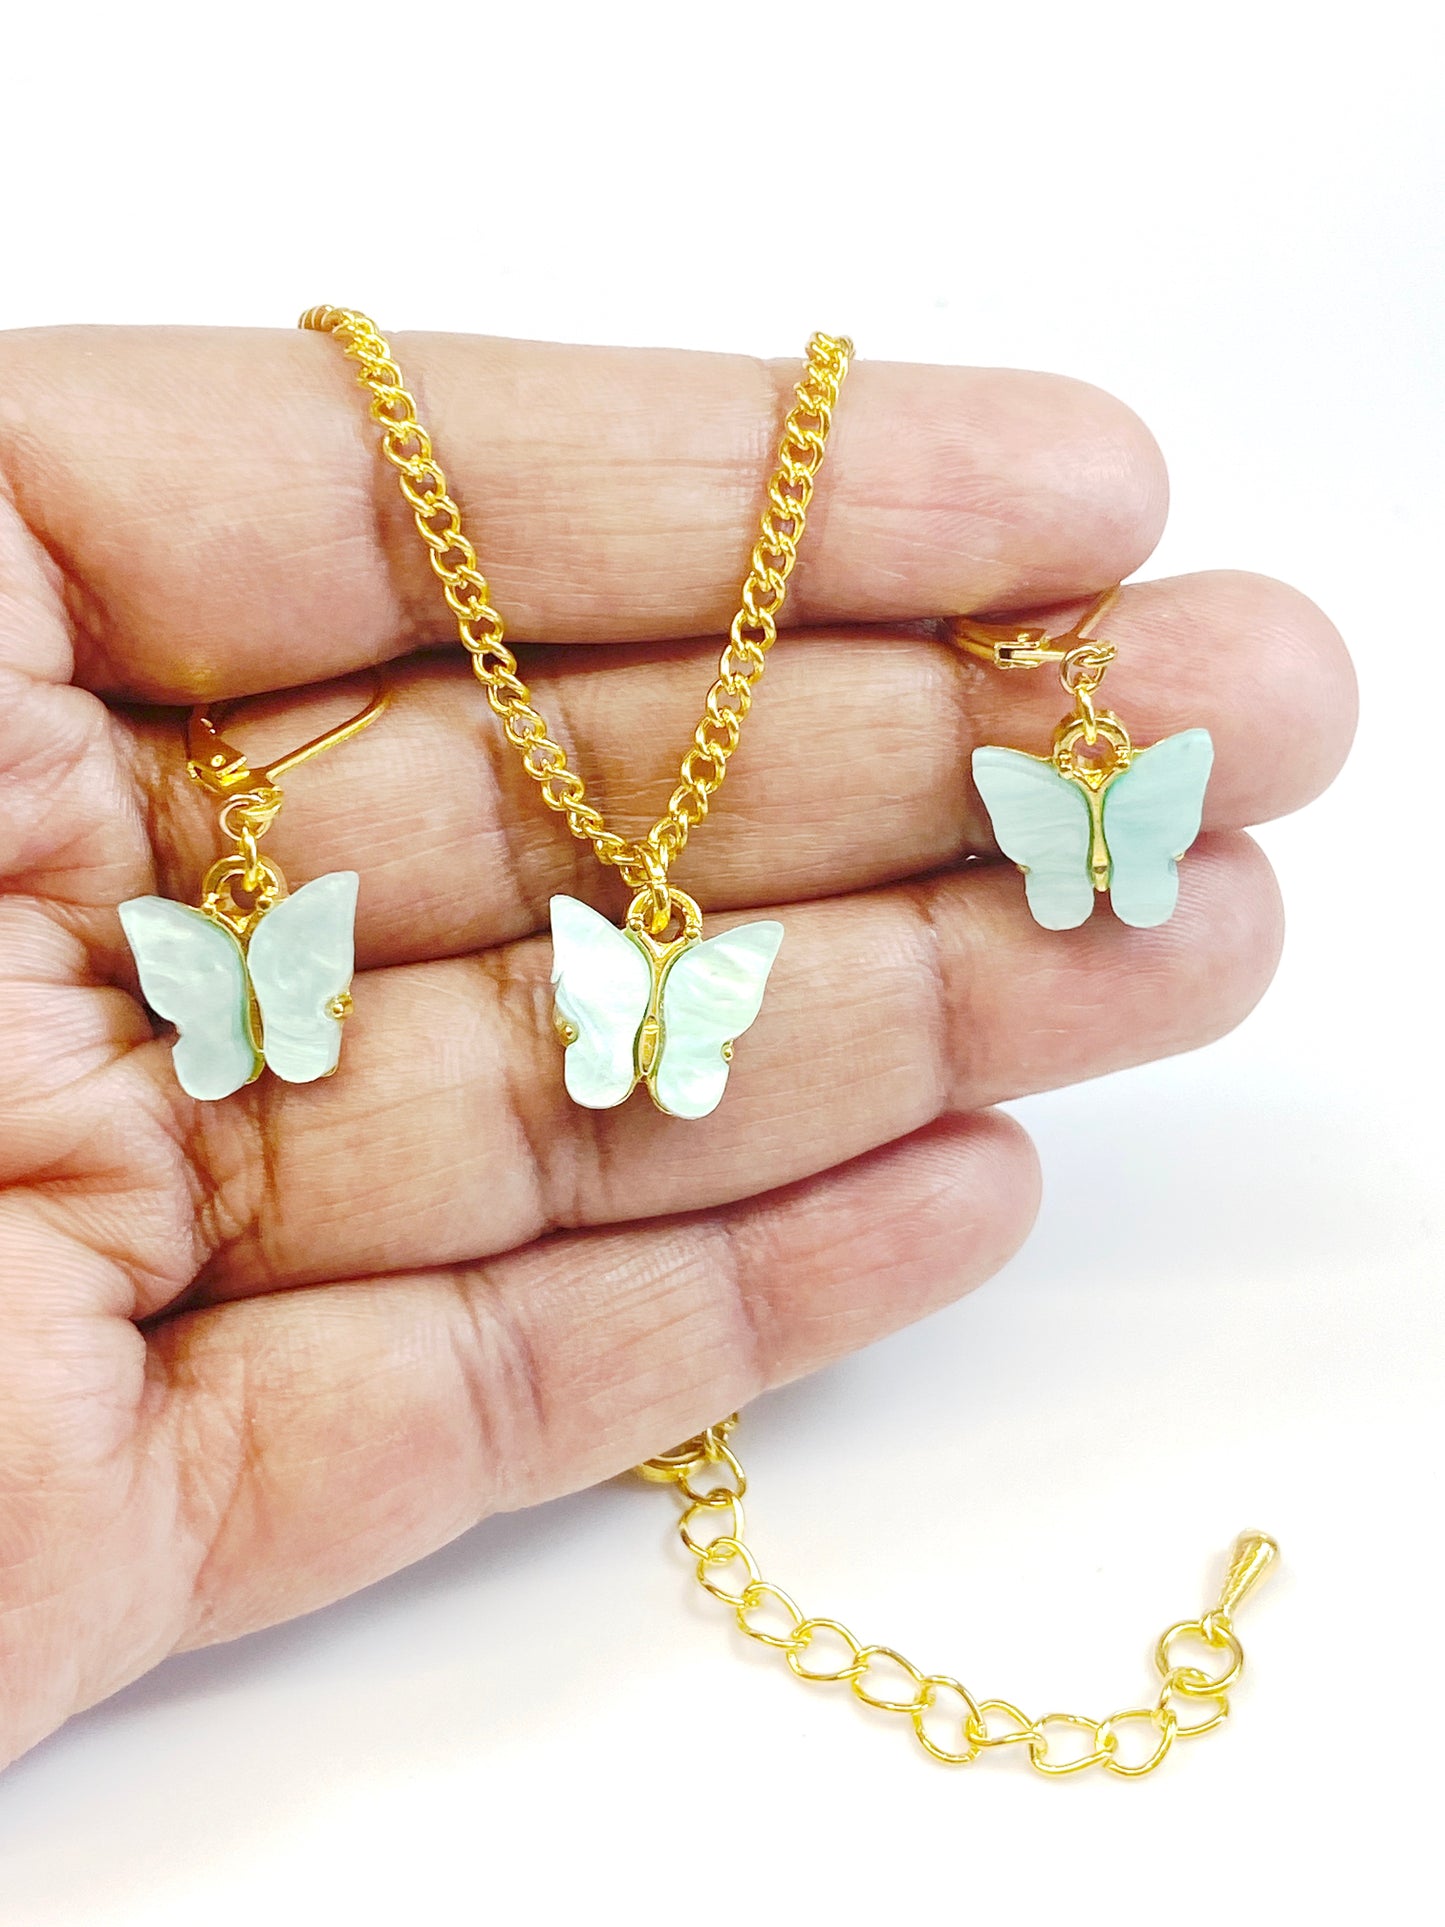 Mini butterfly charm earring and necklace set